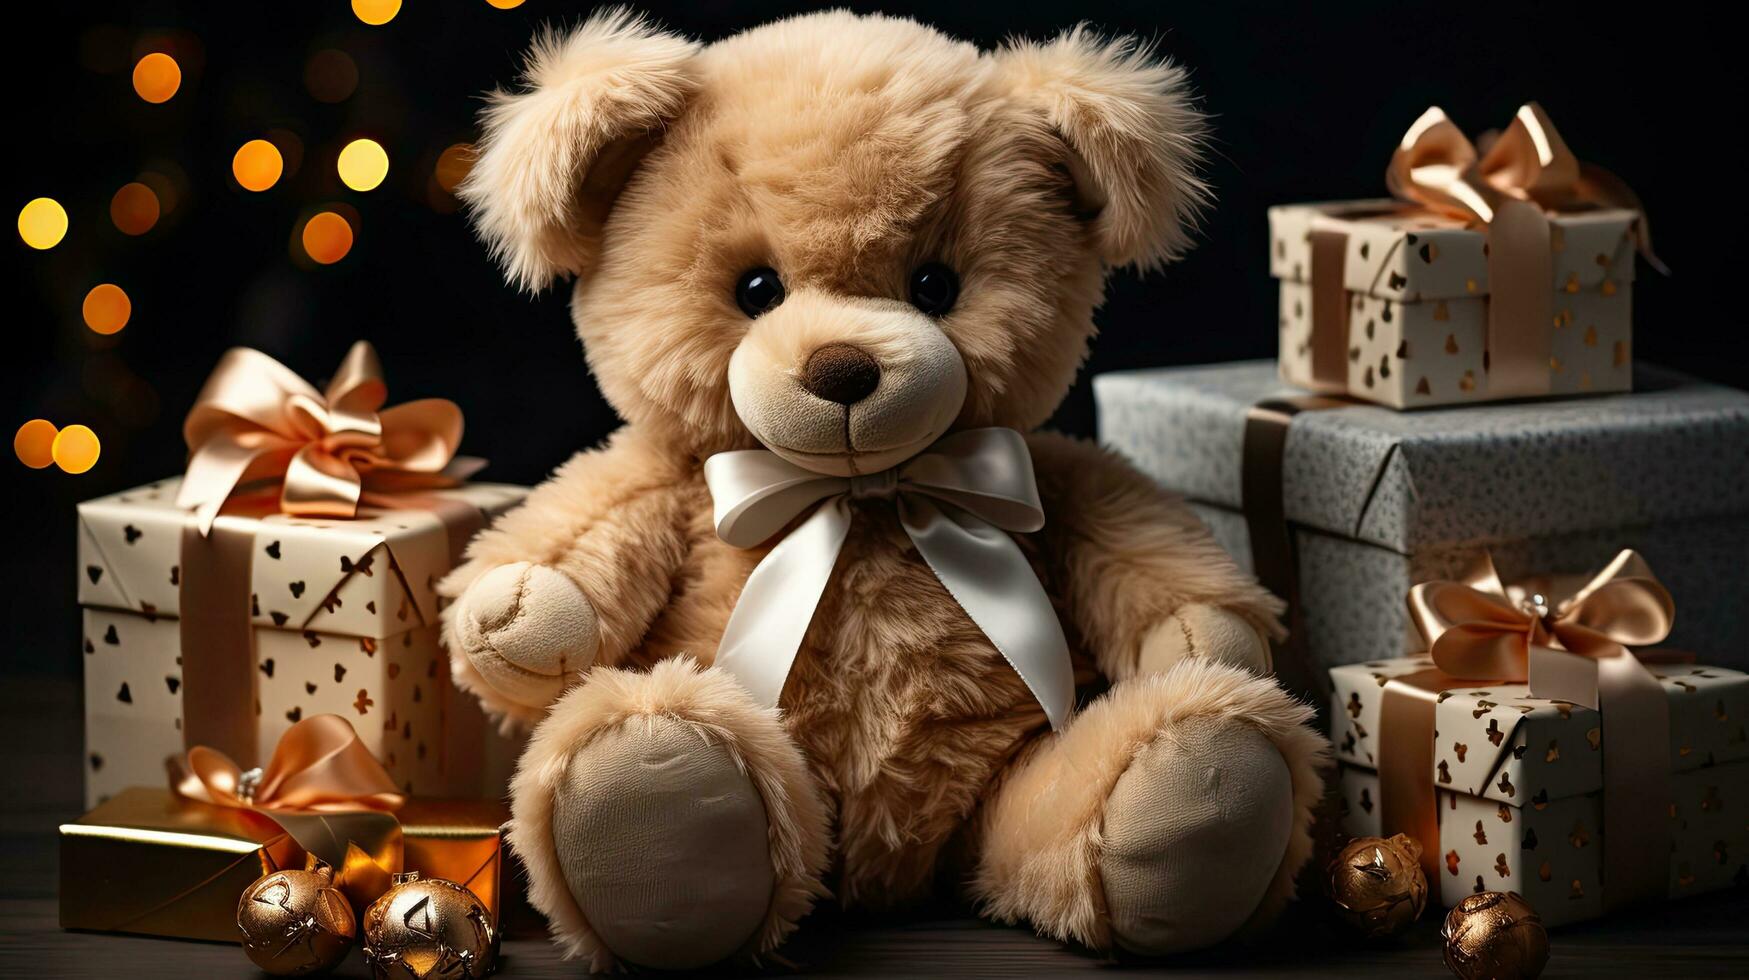 Cute plush toy soft bear and boxes with gifts for Christmas and New Year photo